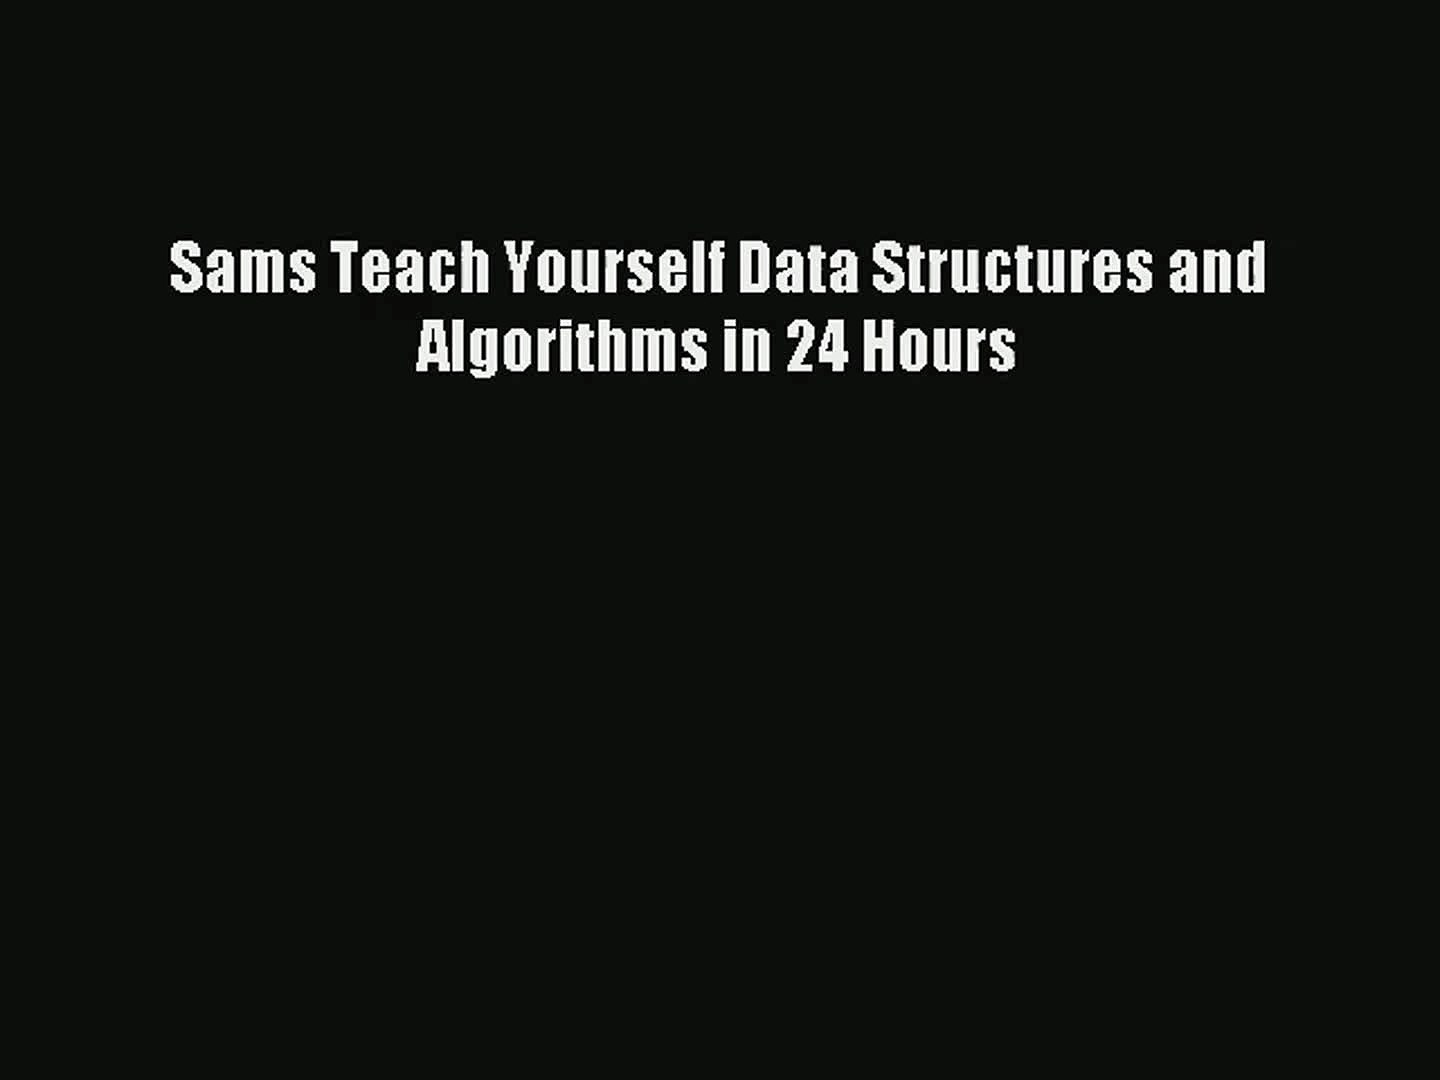 Sams Teach Yourself Data Structures and Algorithms in 24 Hours PDF